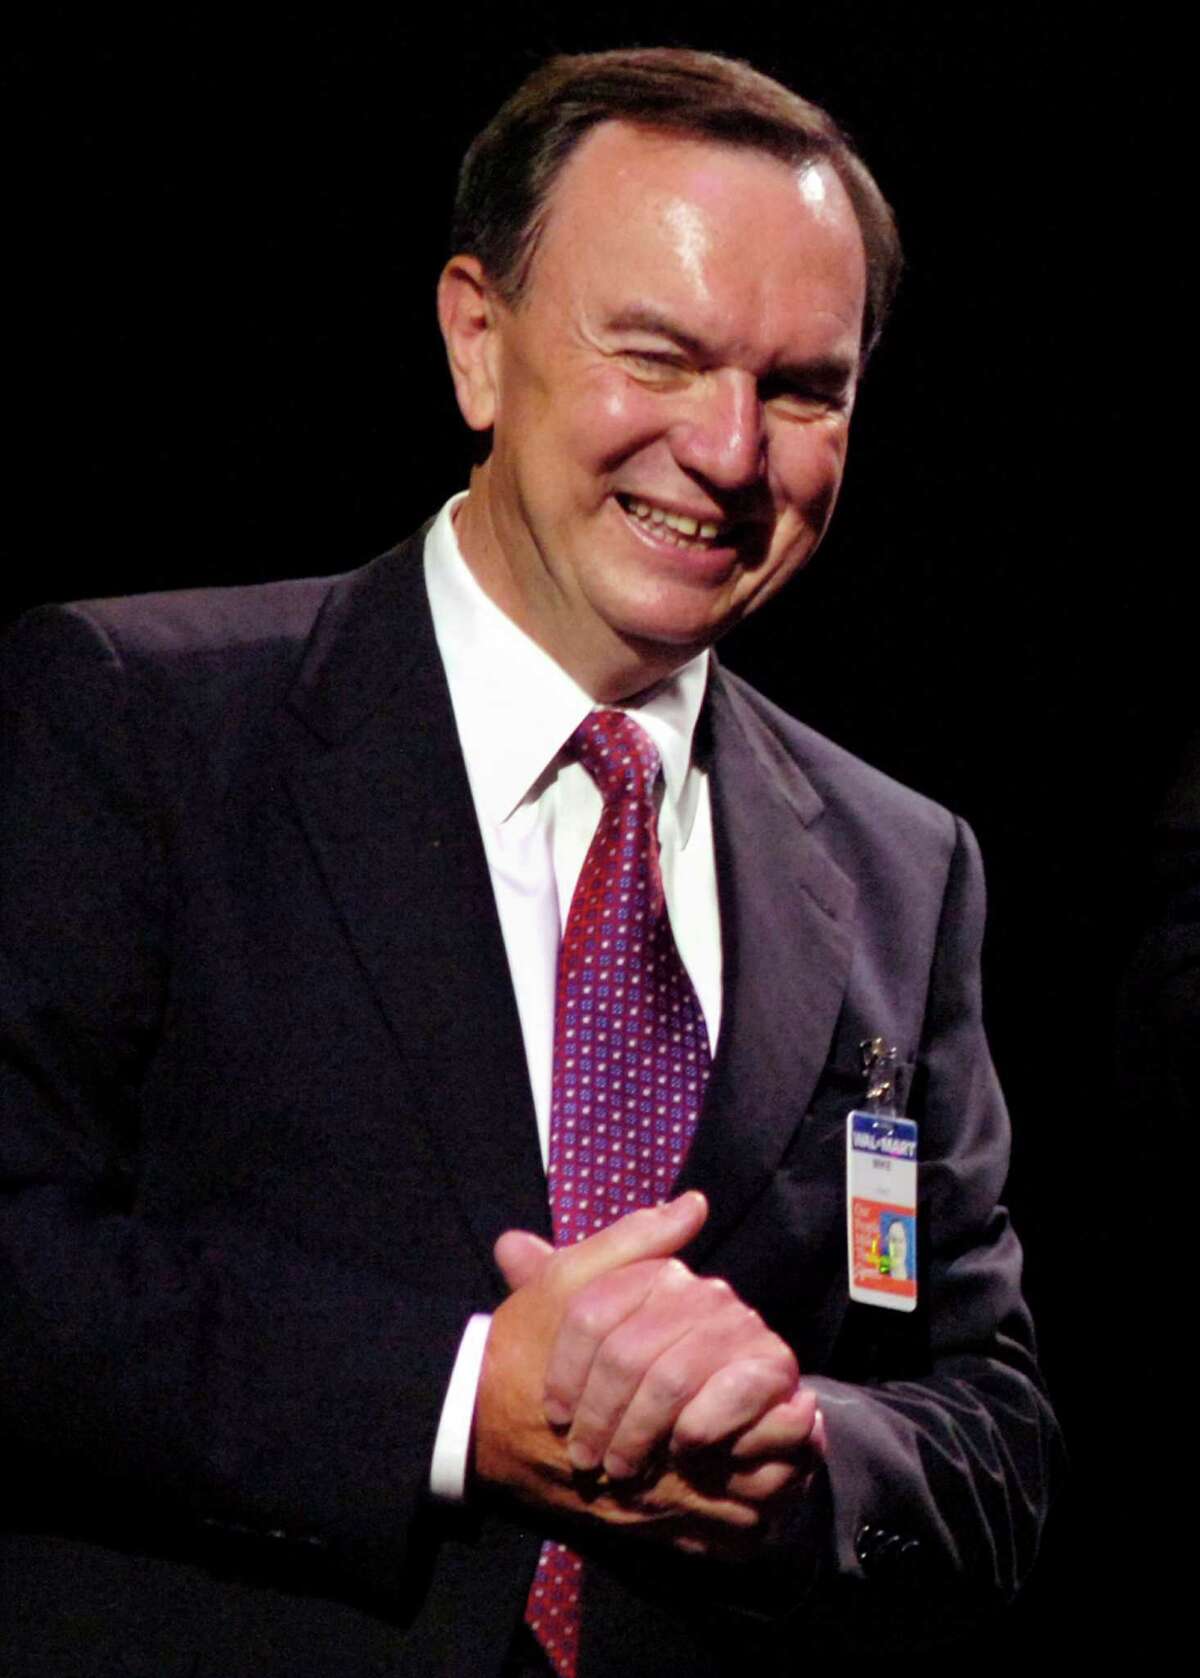 **FILE** In this June 1, 2007 file photo, of Vice Chairman Michael Duke during the annual Wal-Mart shareholders meeting in Fayetteville, Ark. Duke has been named, Friday, Nov. 21, 2008, to replace Lee Scott as CEO of Wal-Mart in Feb. 2009. (AP Photo/April L. Brown, File)